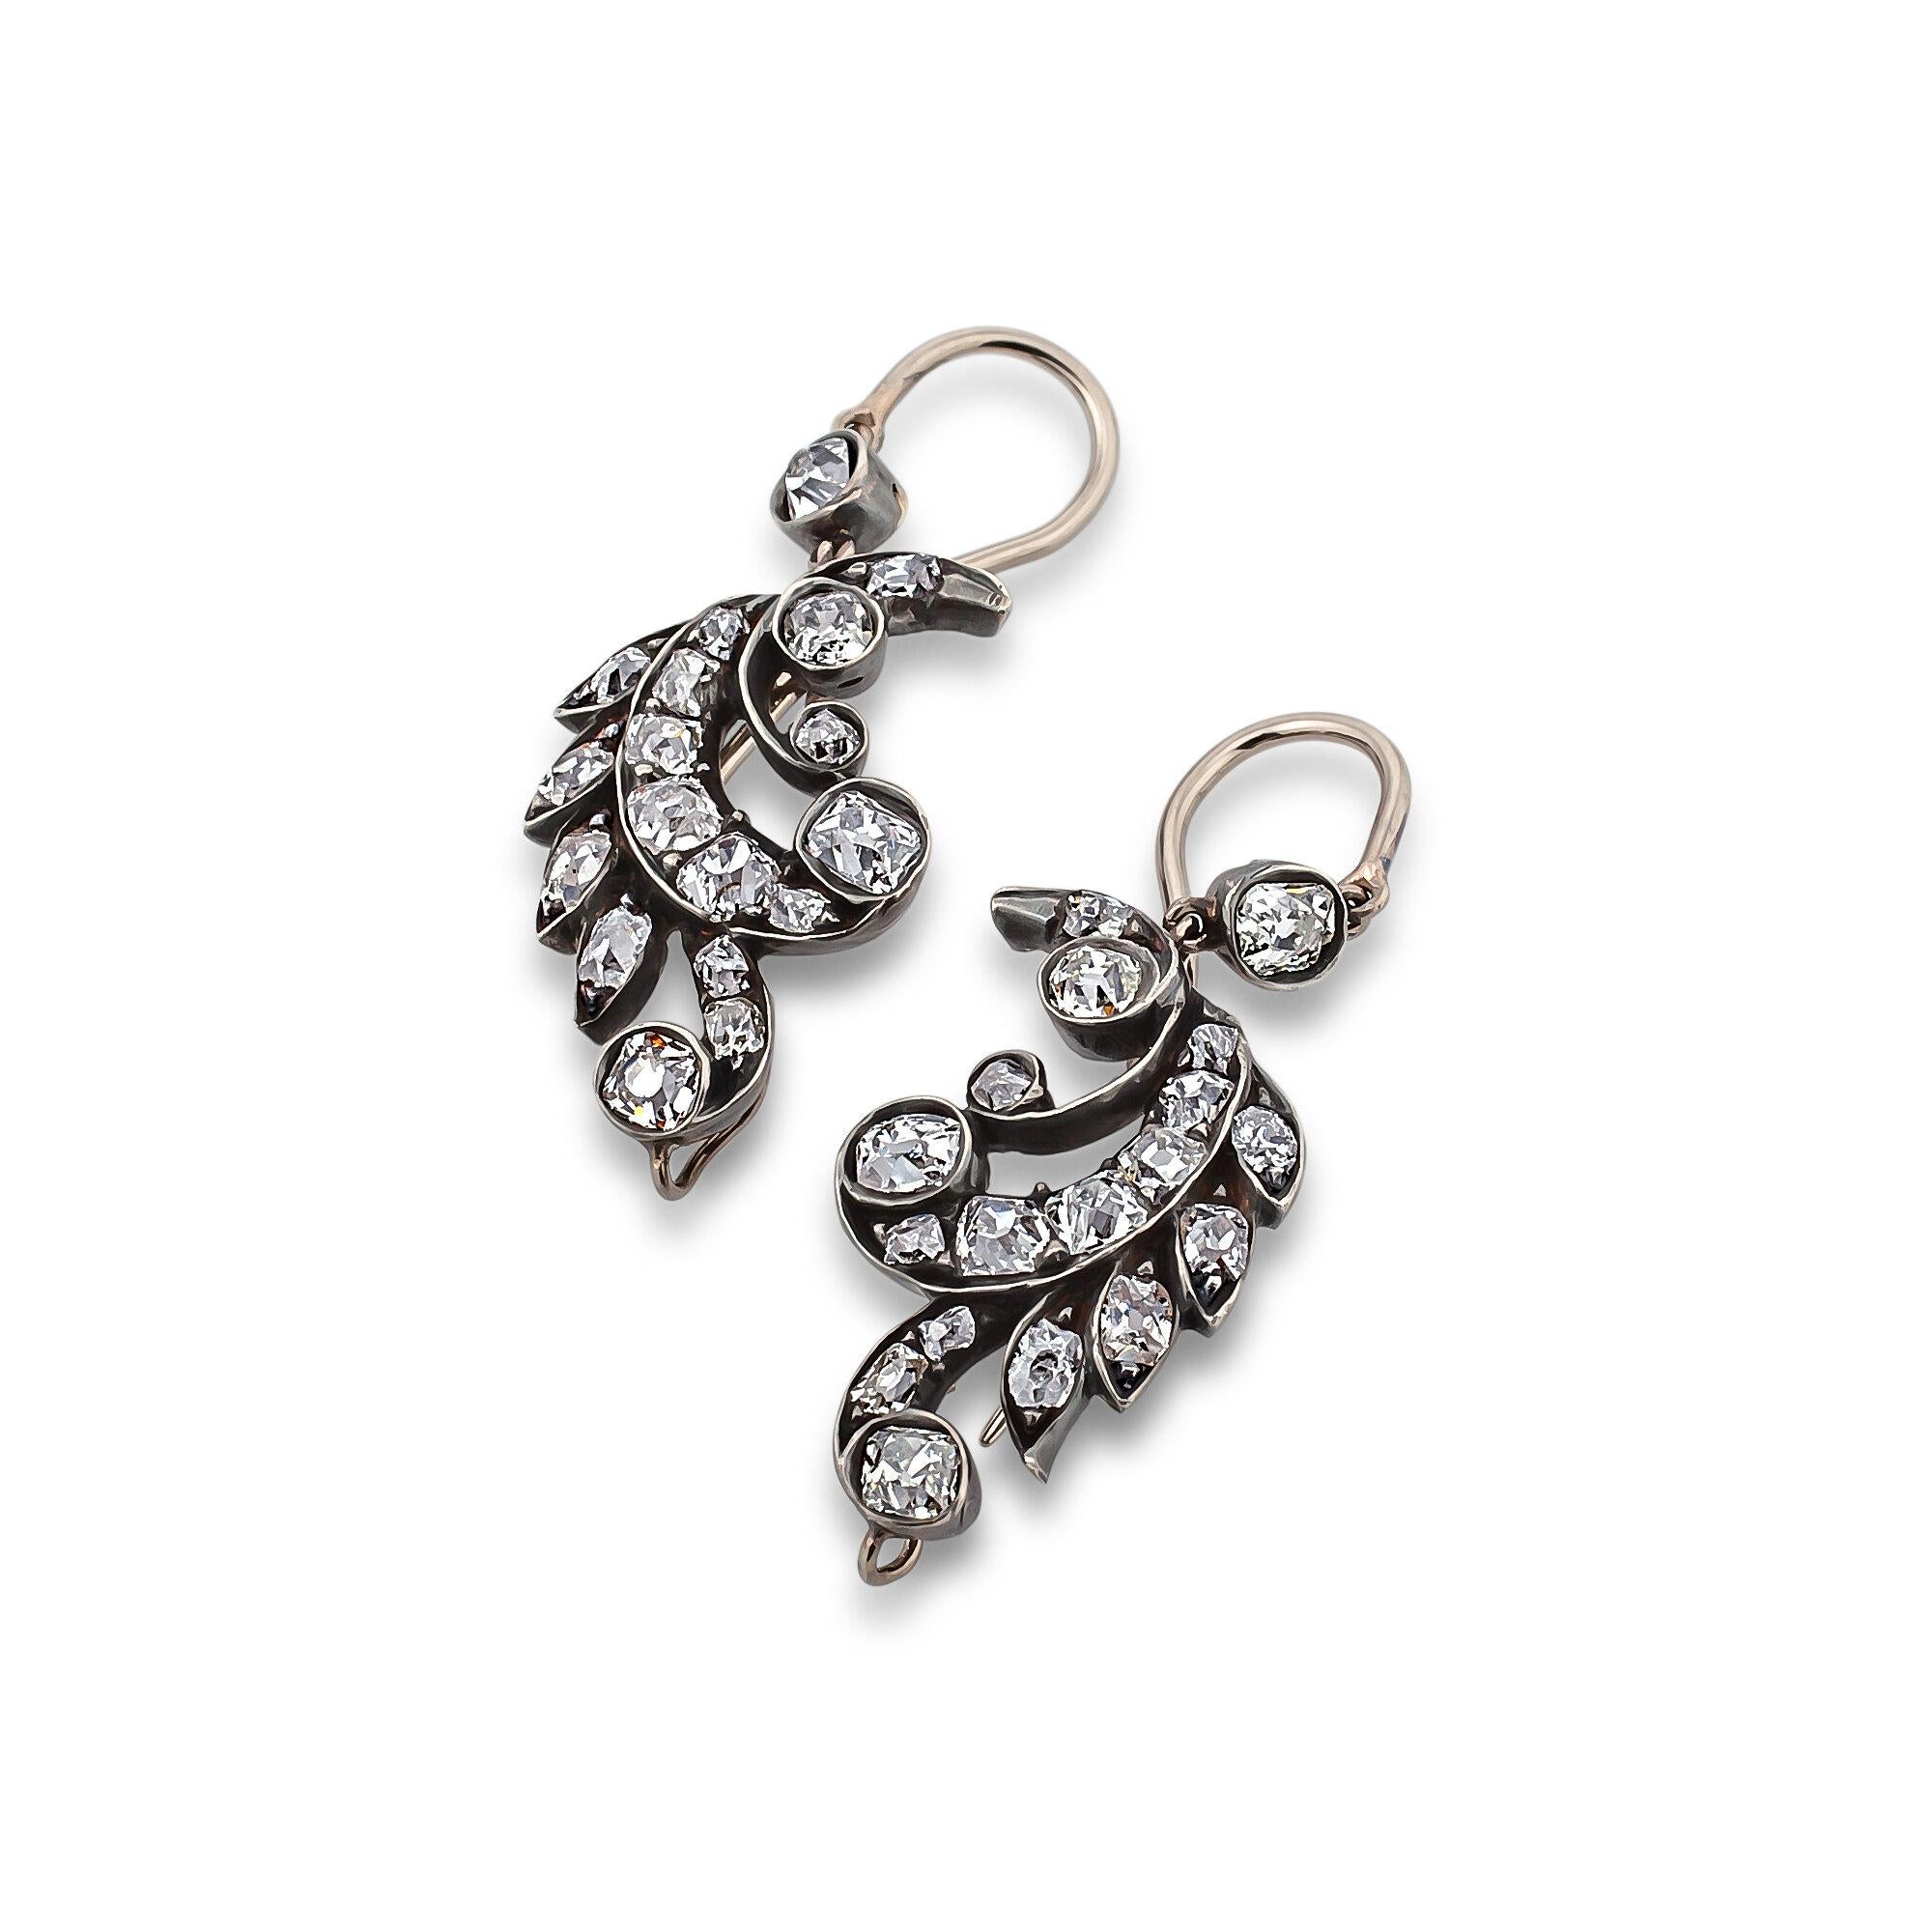 These Victorian handmade diamond, gold, and silver drop earrings will always keep you outdoor fresh.  With a total of approximately 1.00 carat of round cut diamonds mounted in blackened silver, these graceful and elegant leaf earrings look as though